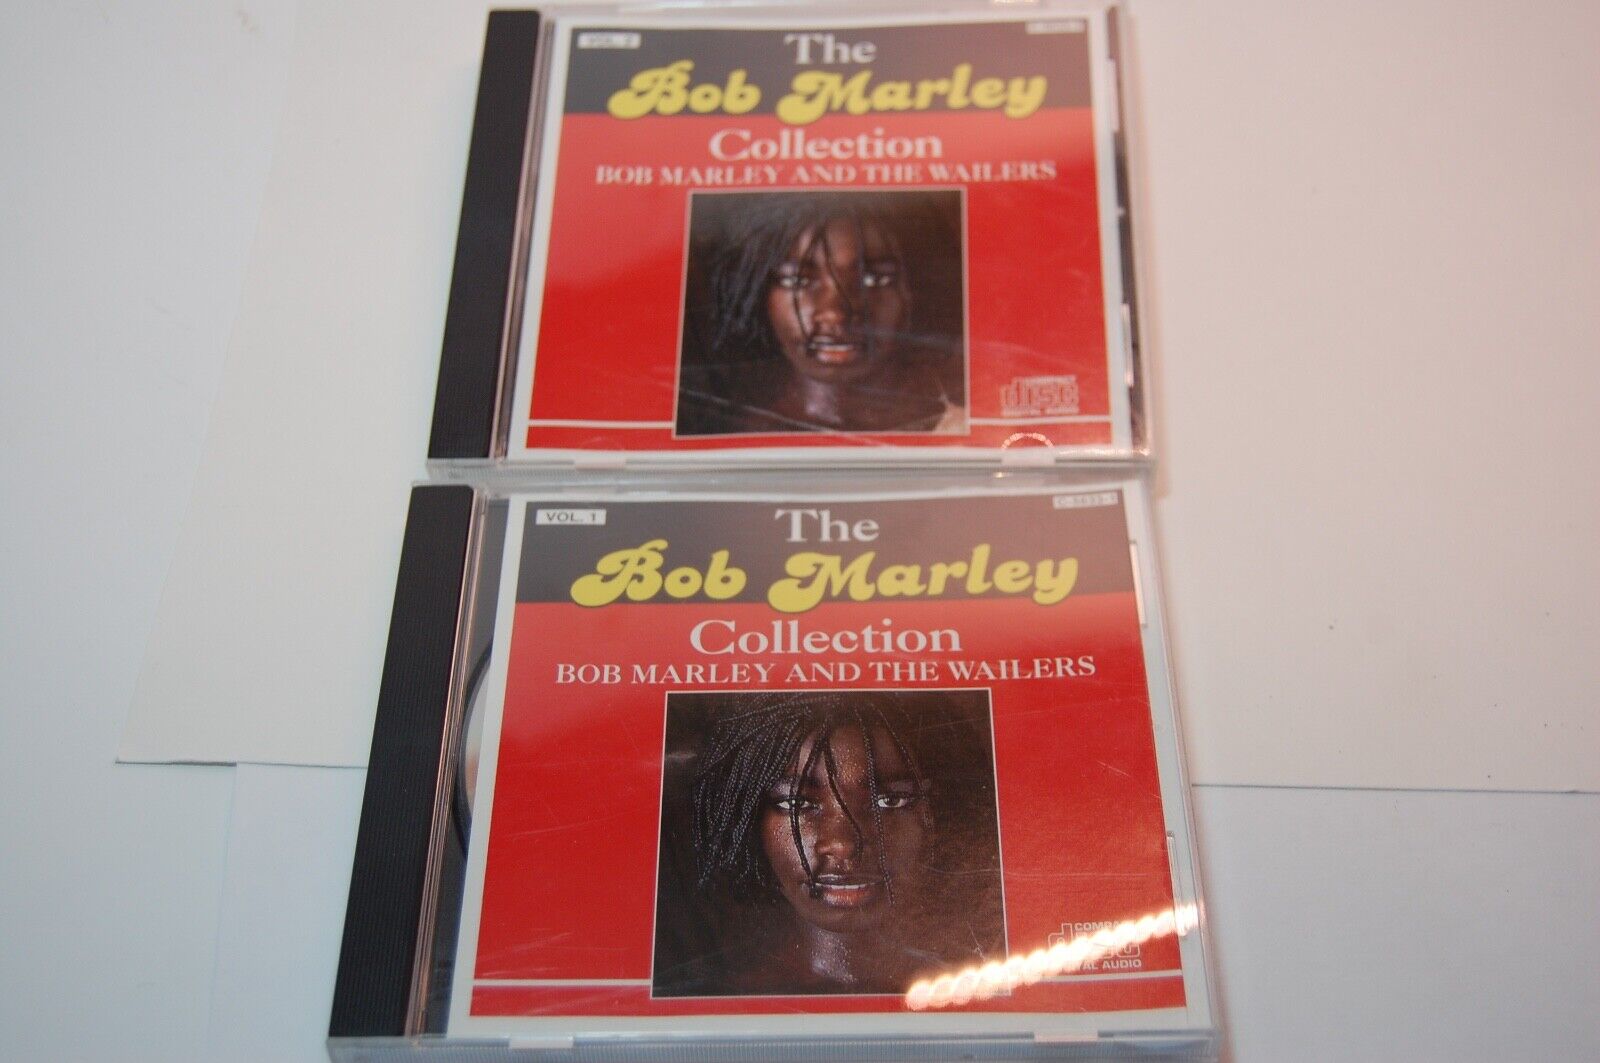 Bob Marley and the Wailers Collection Volumes 1, 2 C-5633-2 & C-5633-1